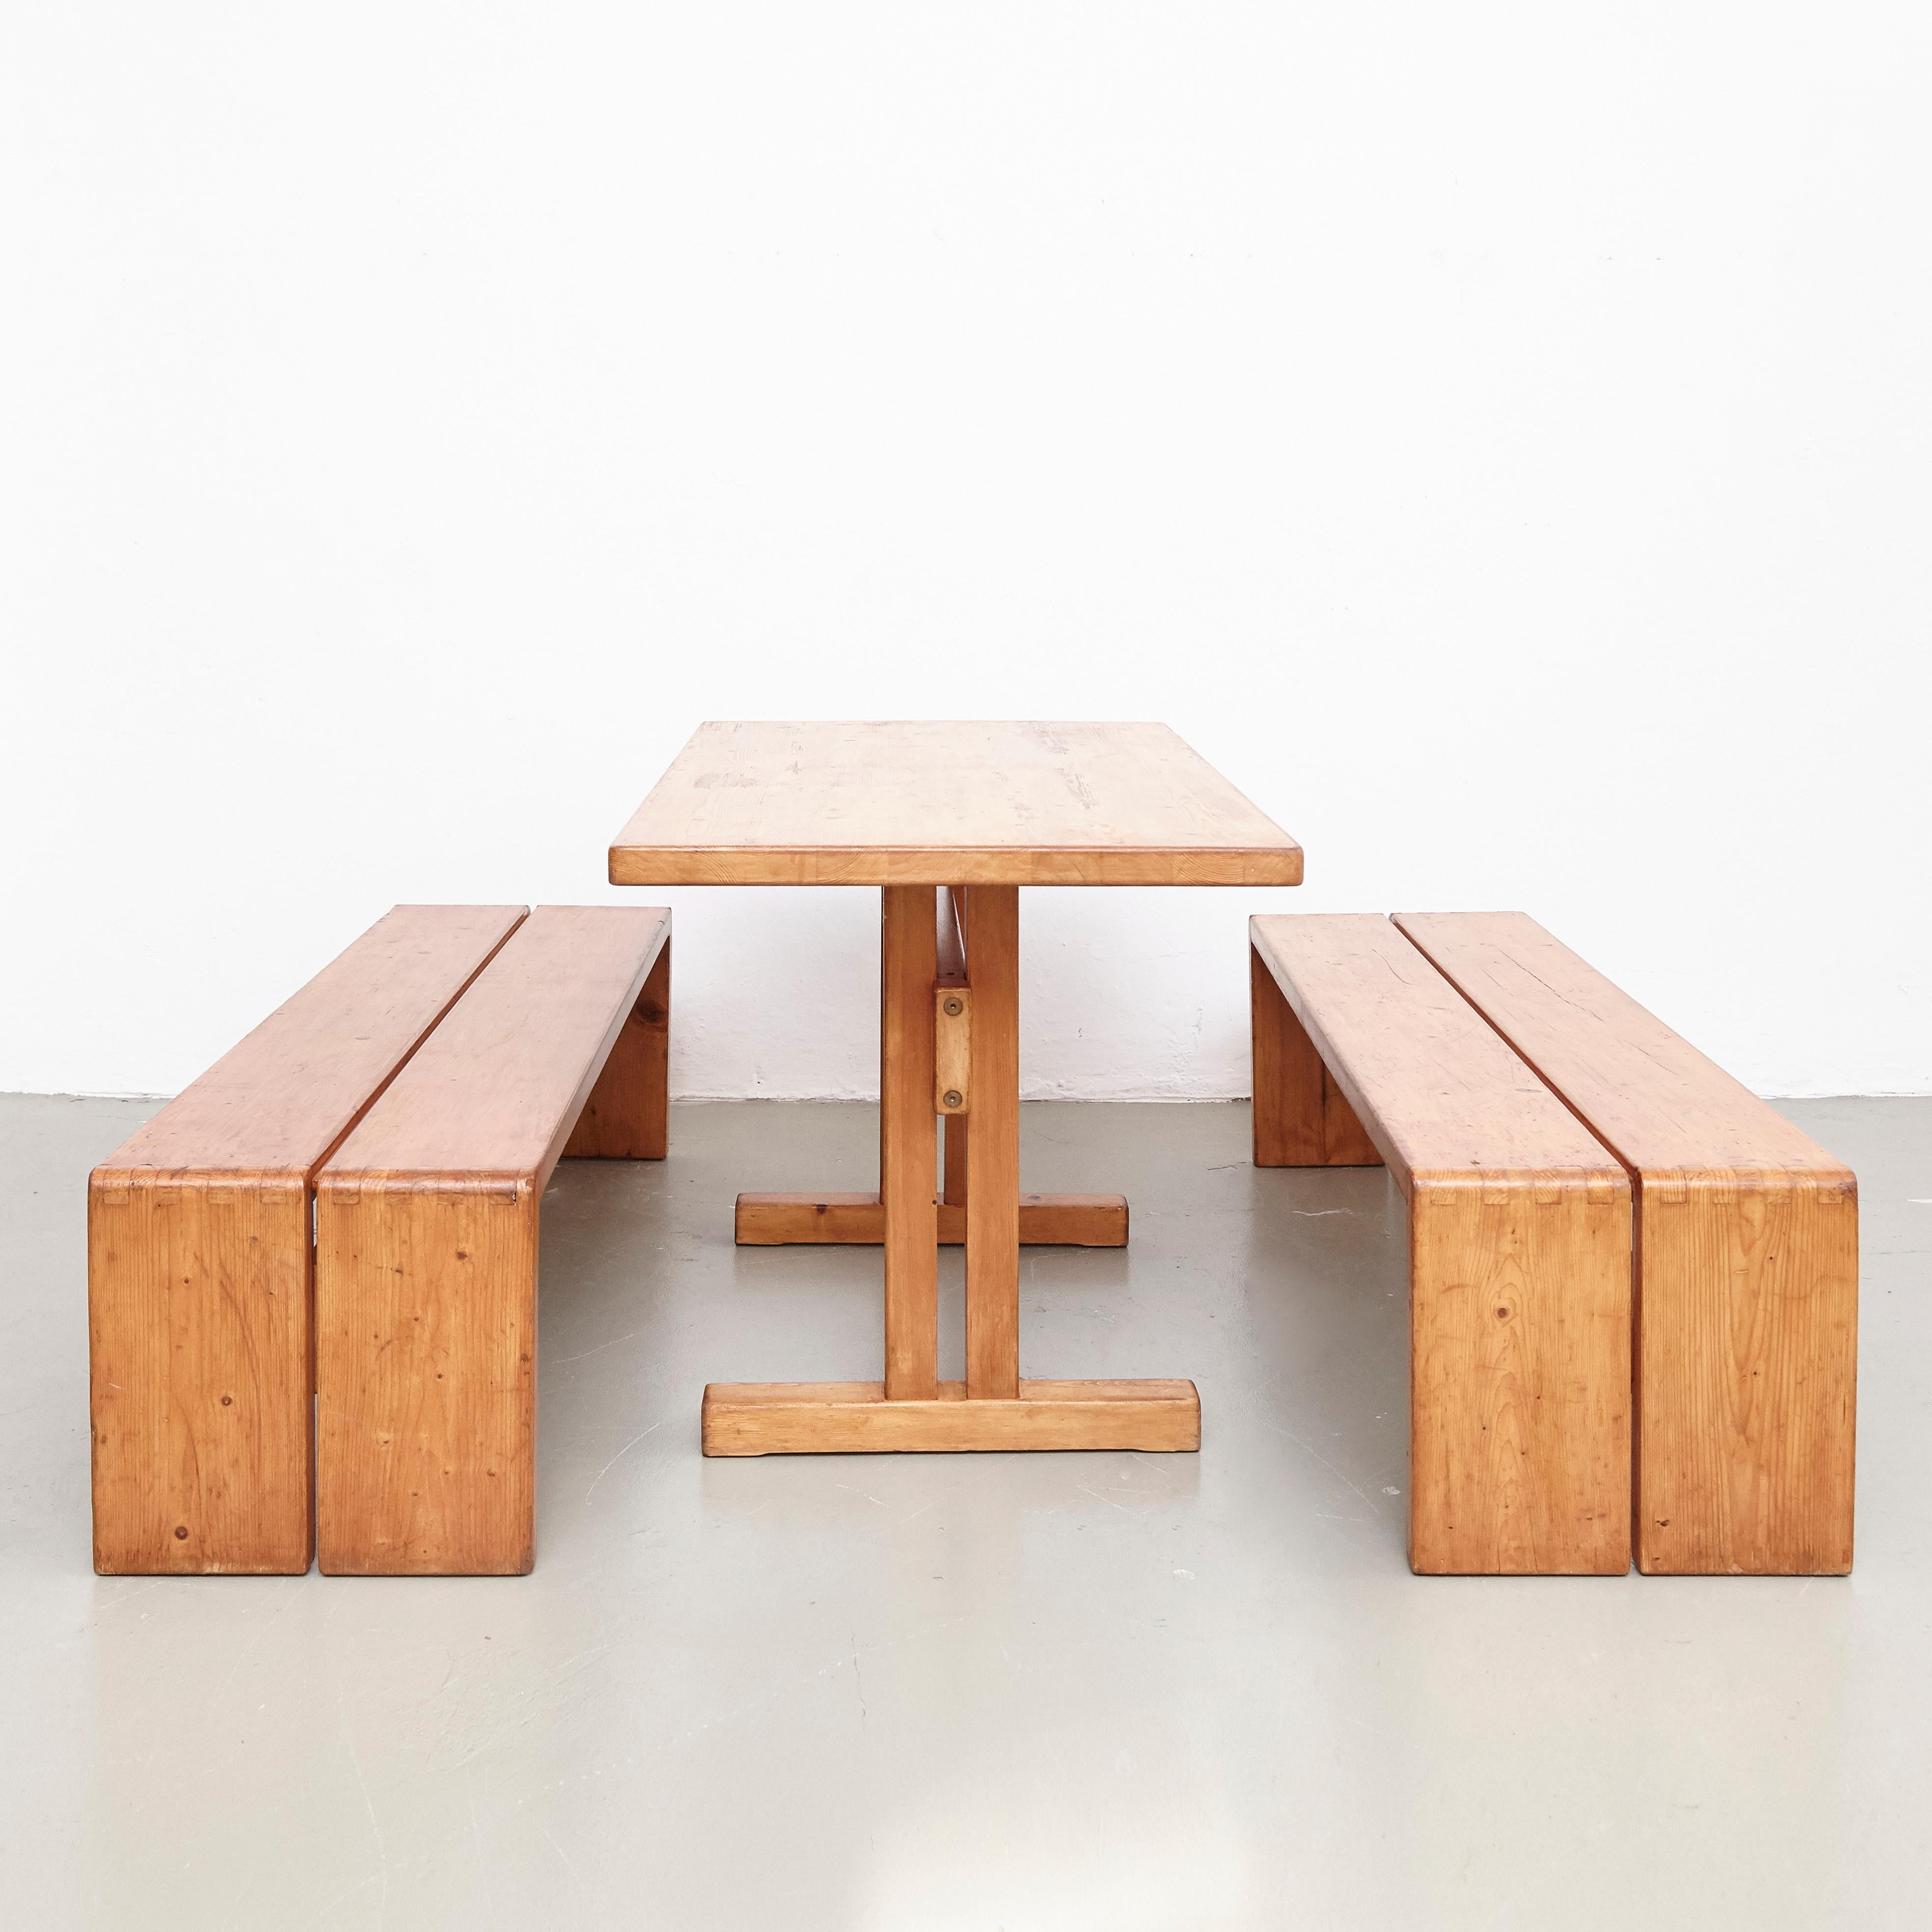 Set of table and two benches designed by Charlotte Perriand for Les Arcs ski resort, circa 1960, manufactured in France.

Pinewood.

In original condition, with minor wear consistent with age and use, preserving a beautiful patina.

Table: 120